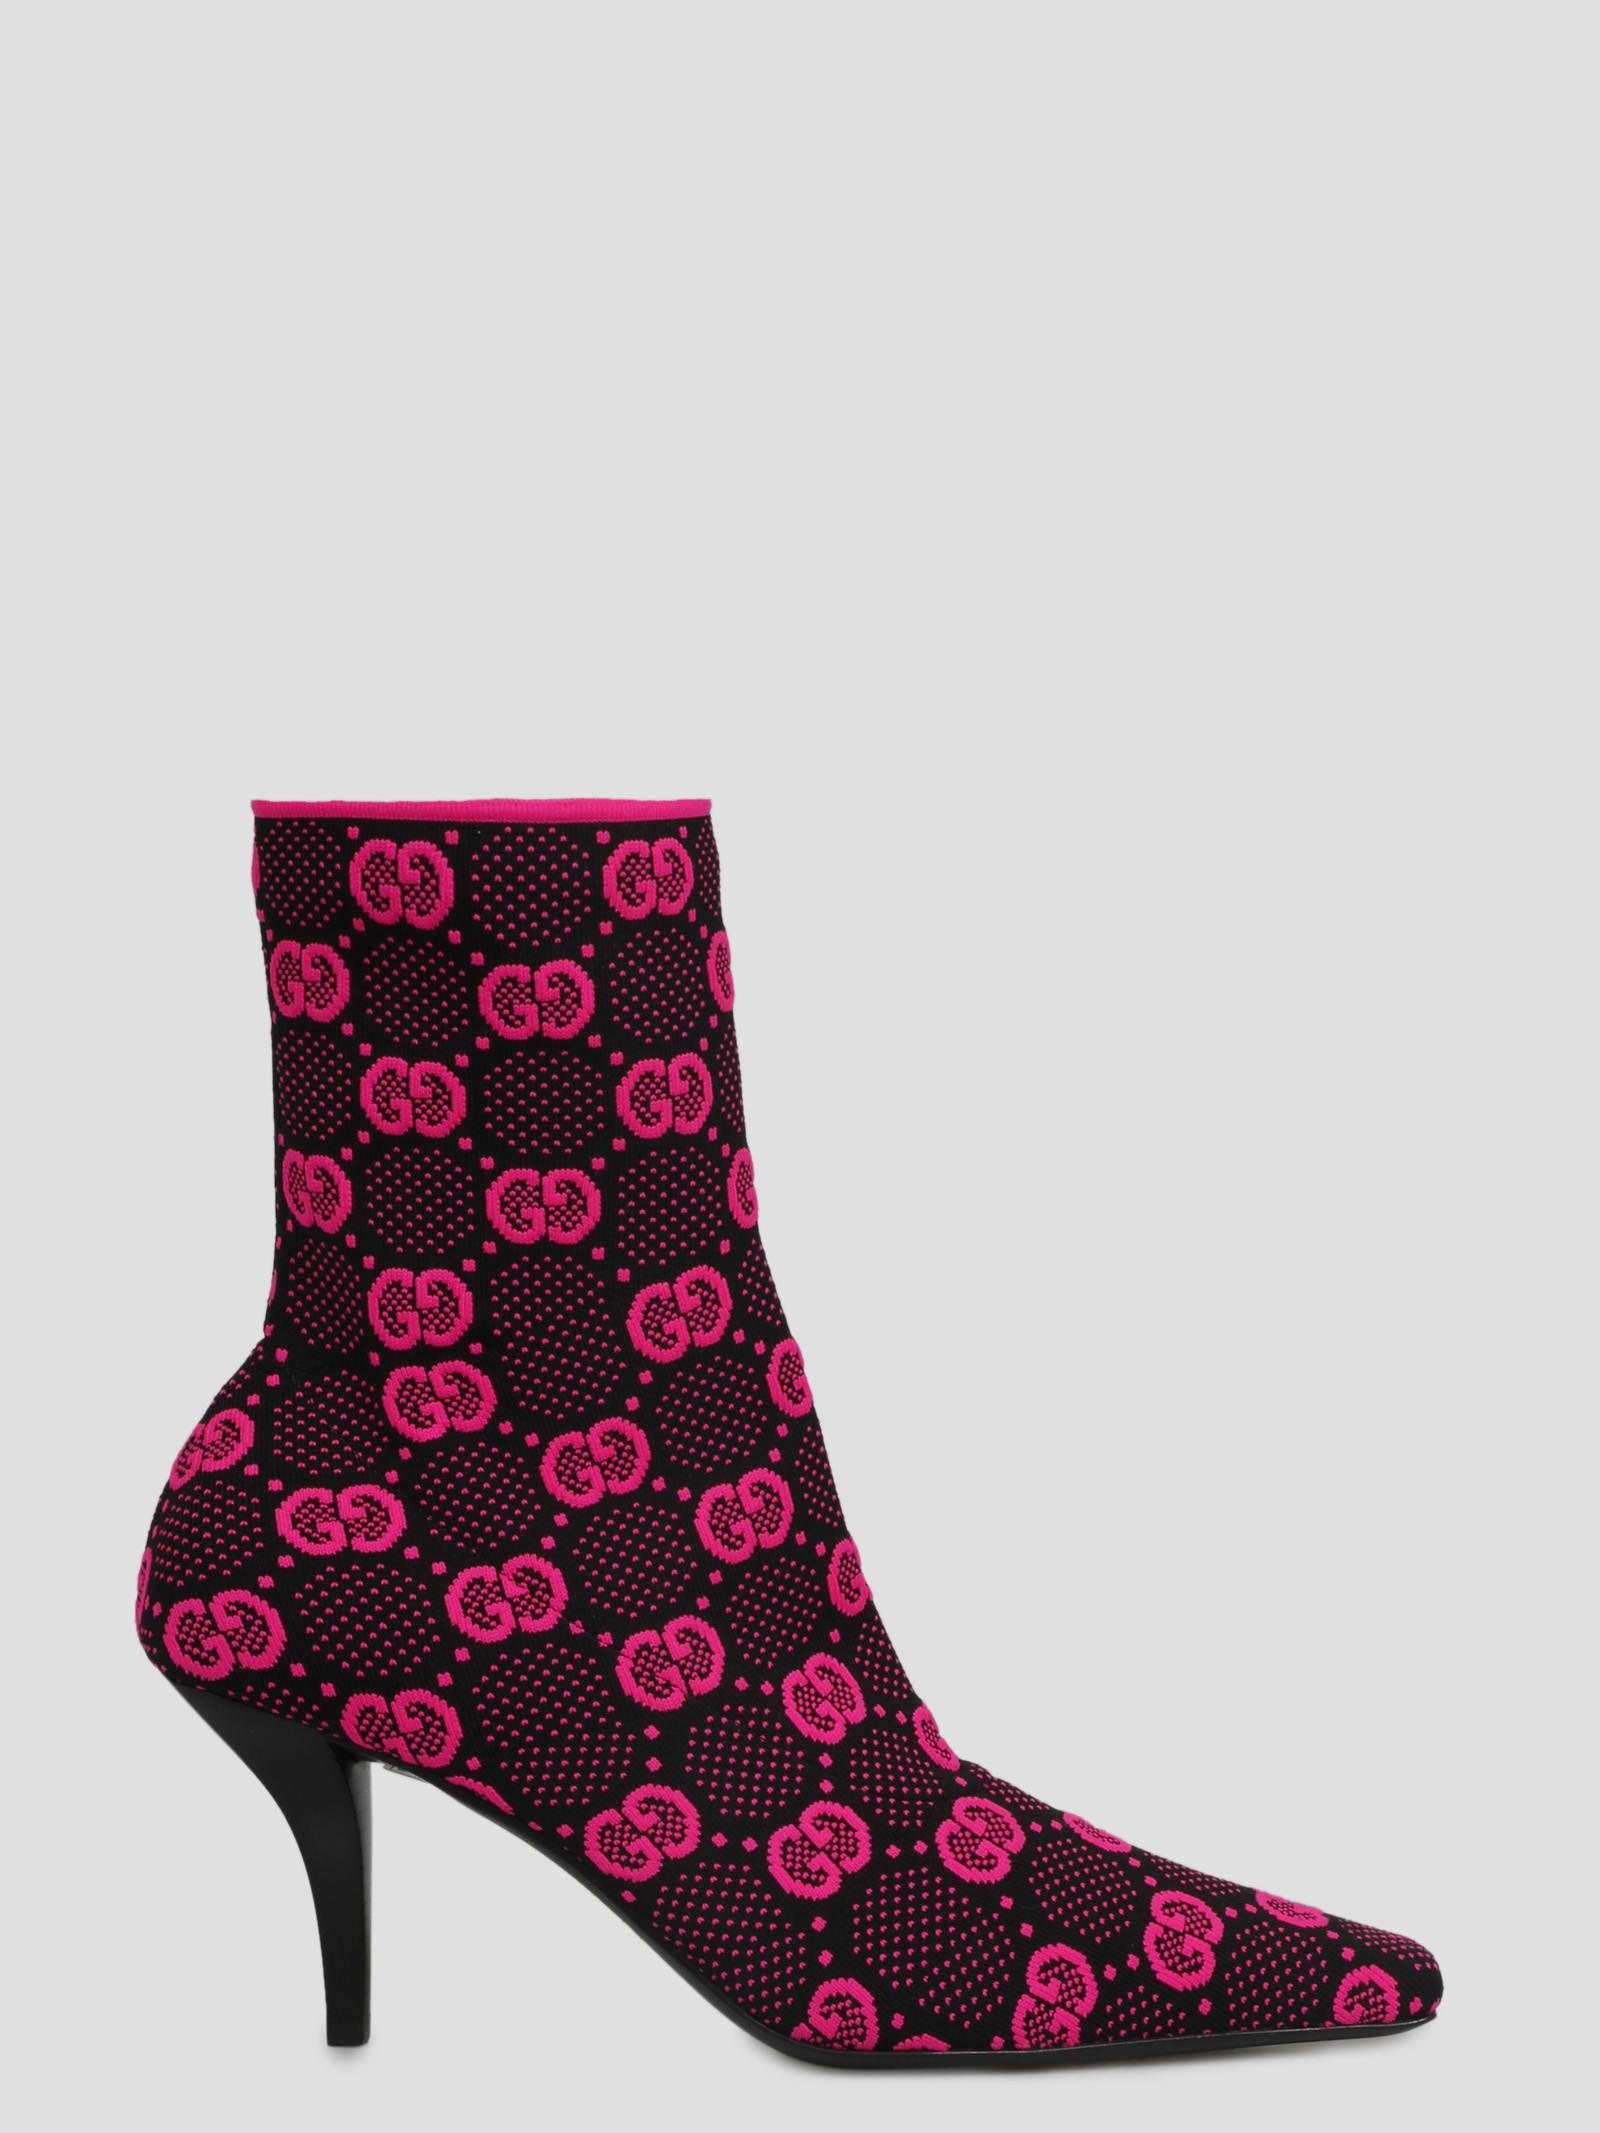 Gucci Gg Knit Ankle Boots in Purple | Lyst